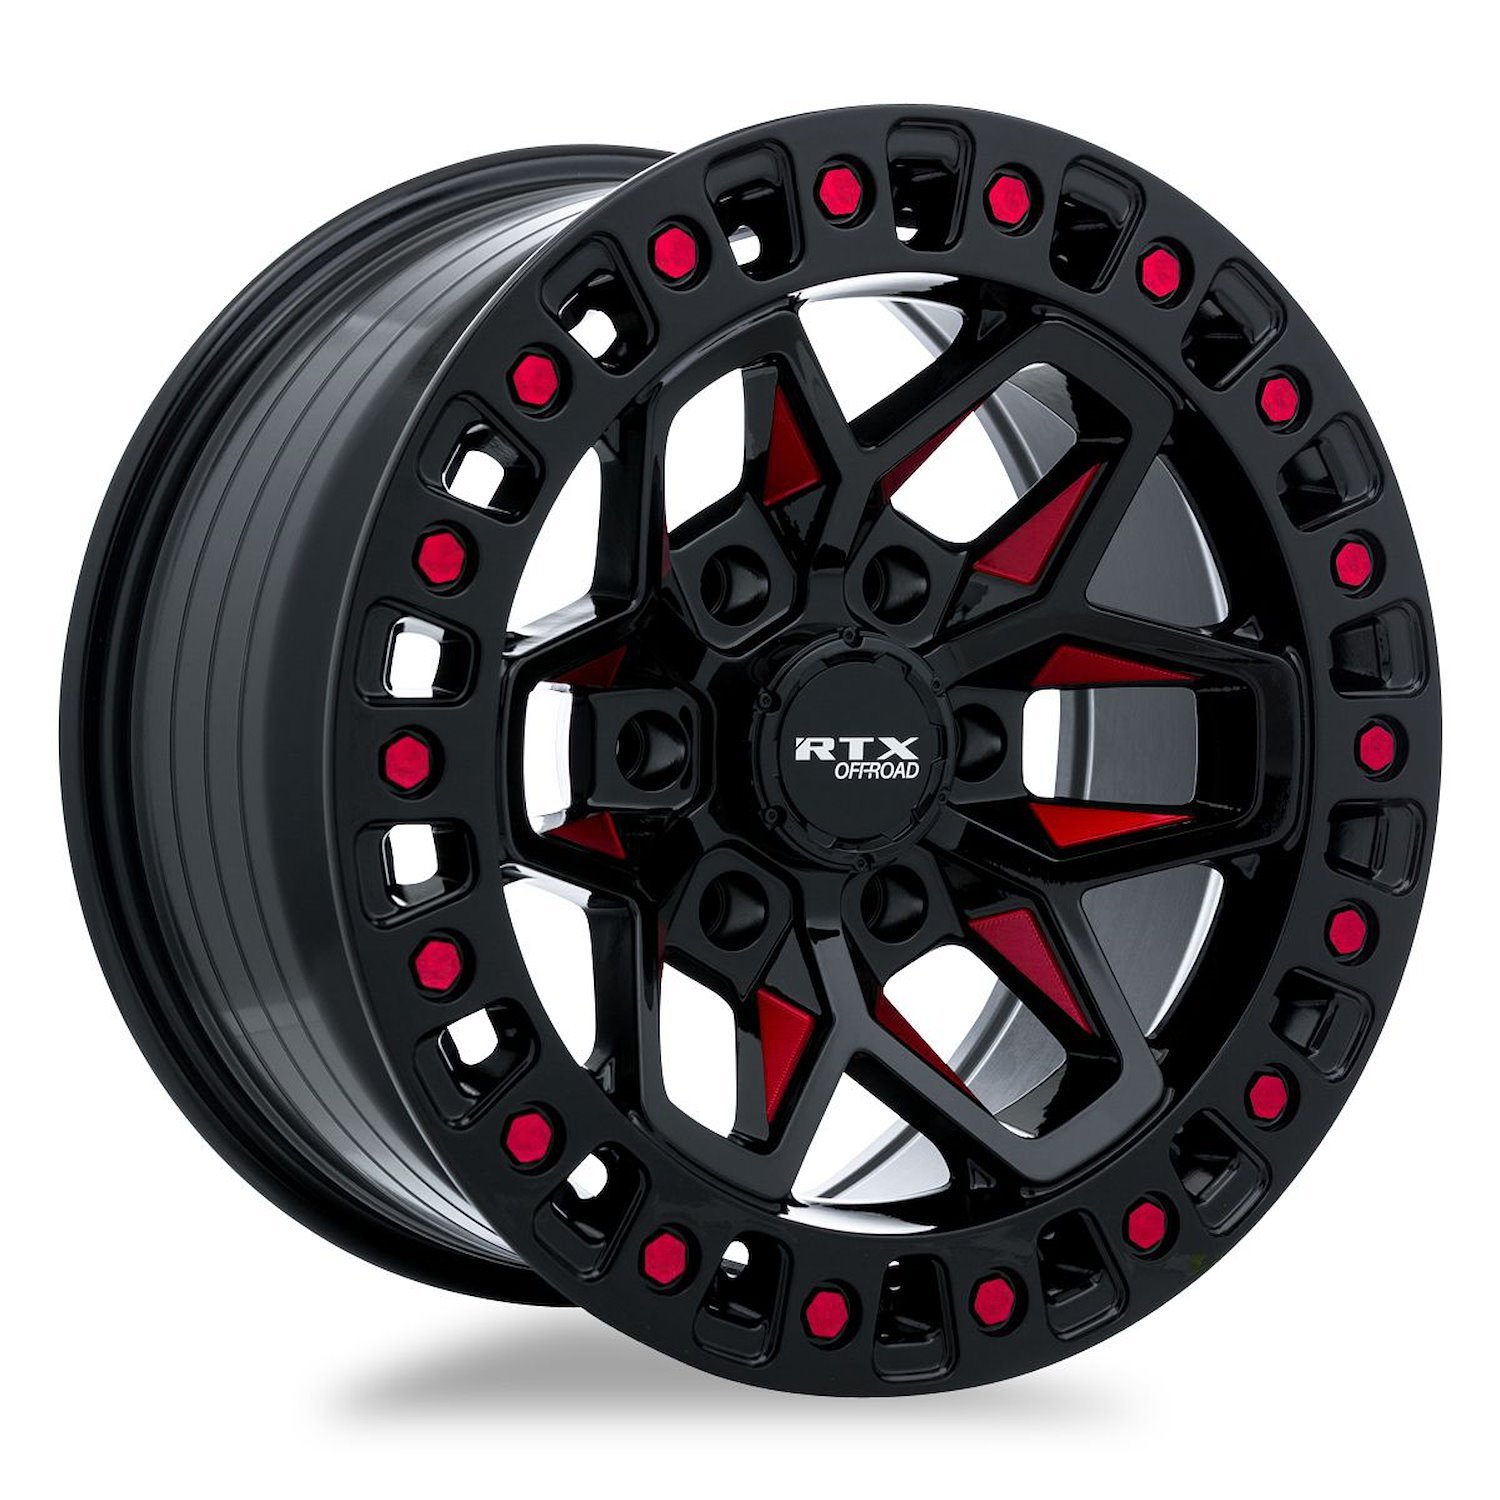 082930 Off-Road Series Zion Wheel [Size: 17" x 9"] Black Milled Red Finish